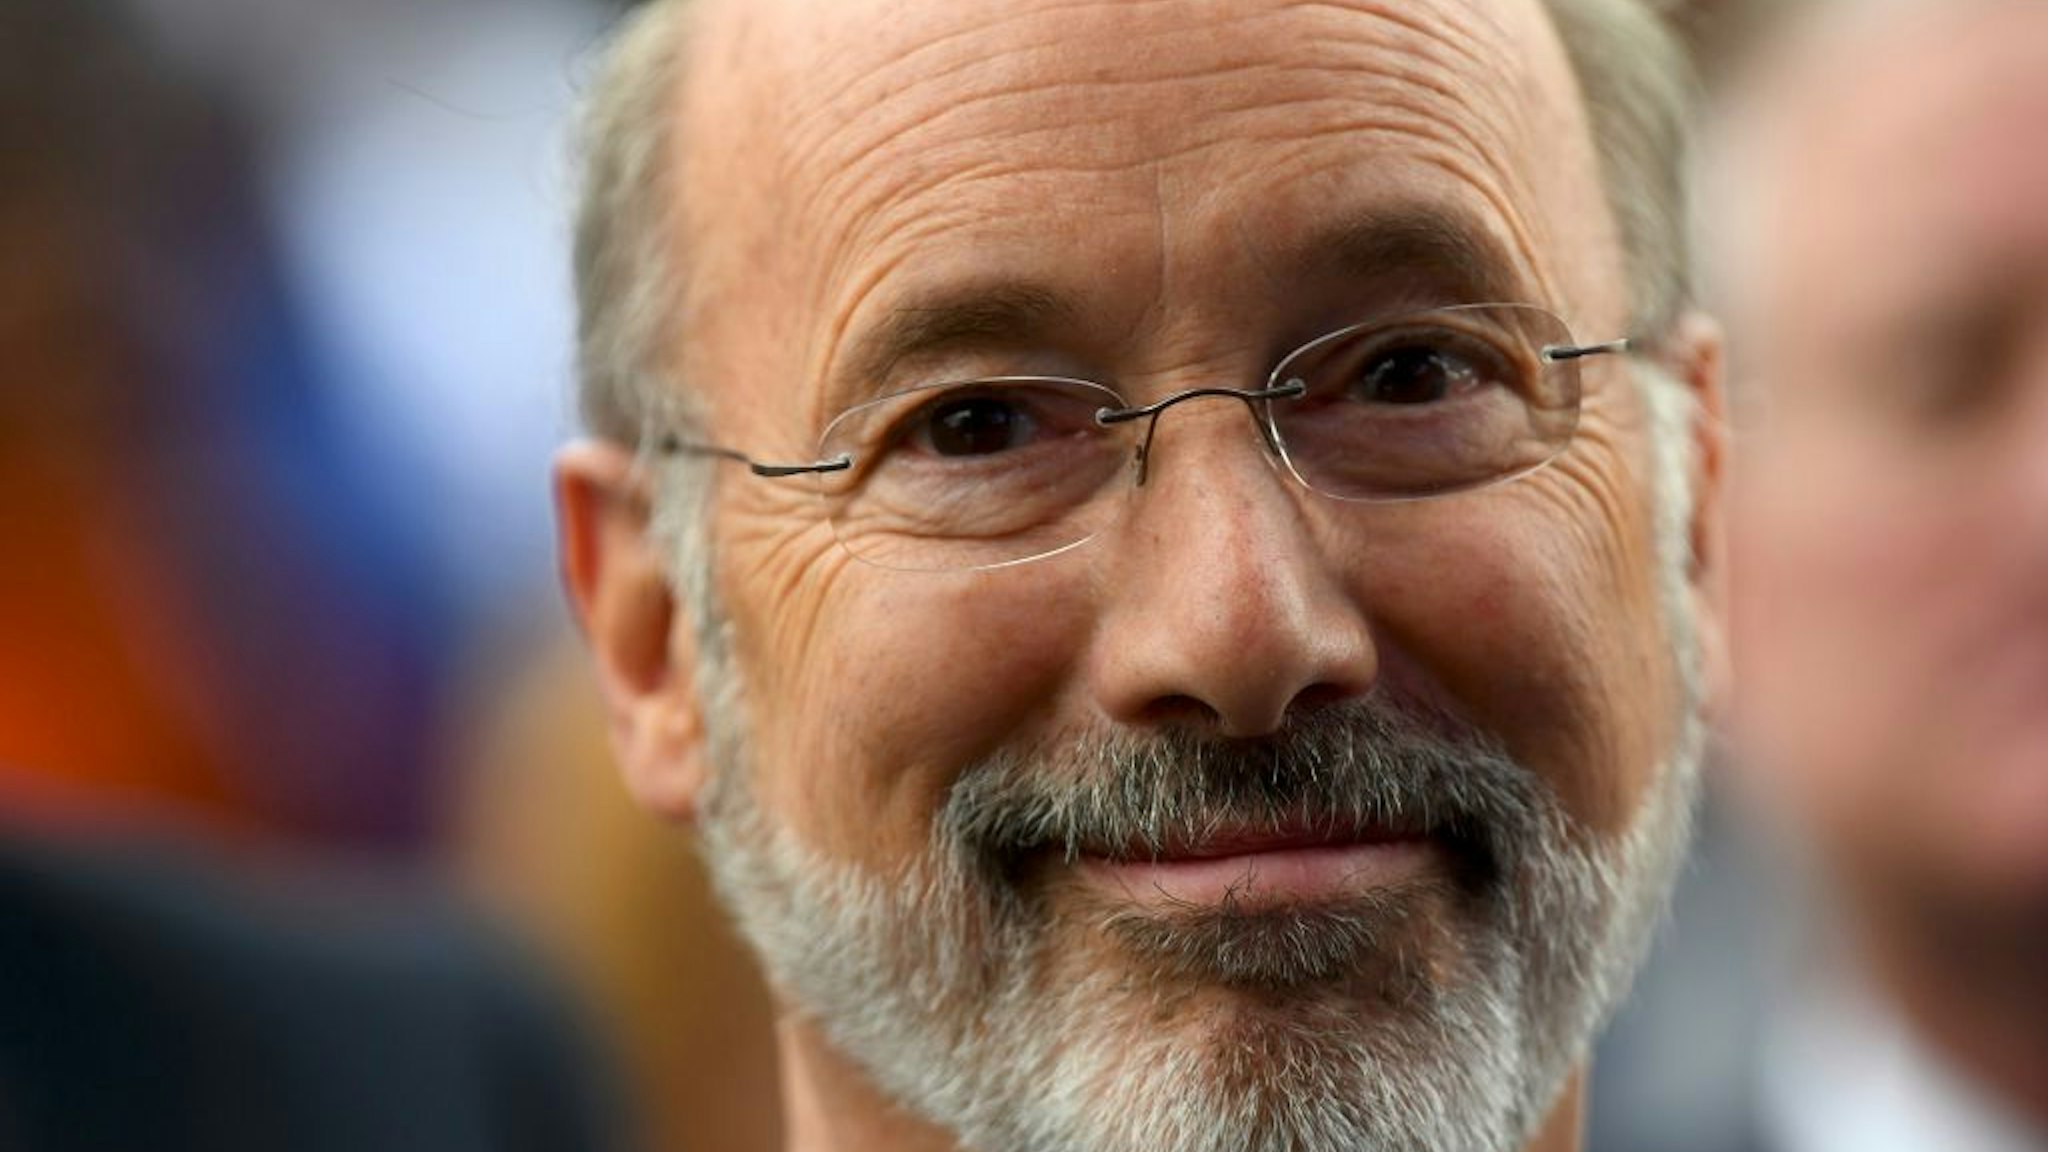 Pennsylvania Governor Tom Wolf reacts while listening to former President Barack Obama speak during a campaign rally for Wolf and Senator Bob Casey (D- PA) on September 21, 2018 in Philadelphia, Pennsylvania.